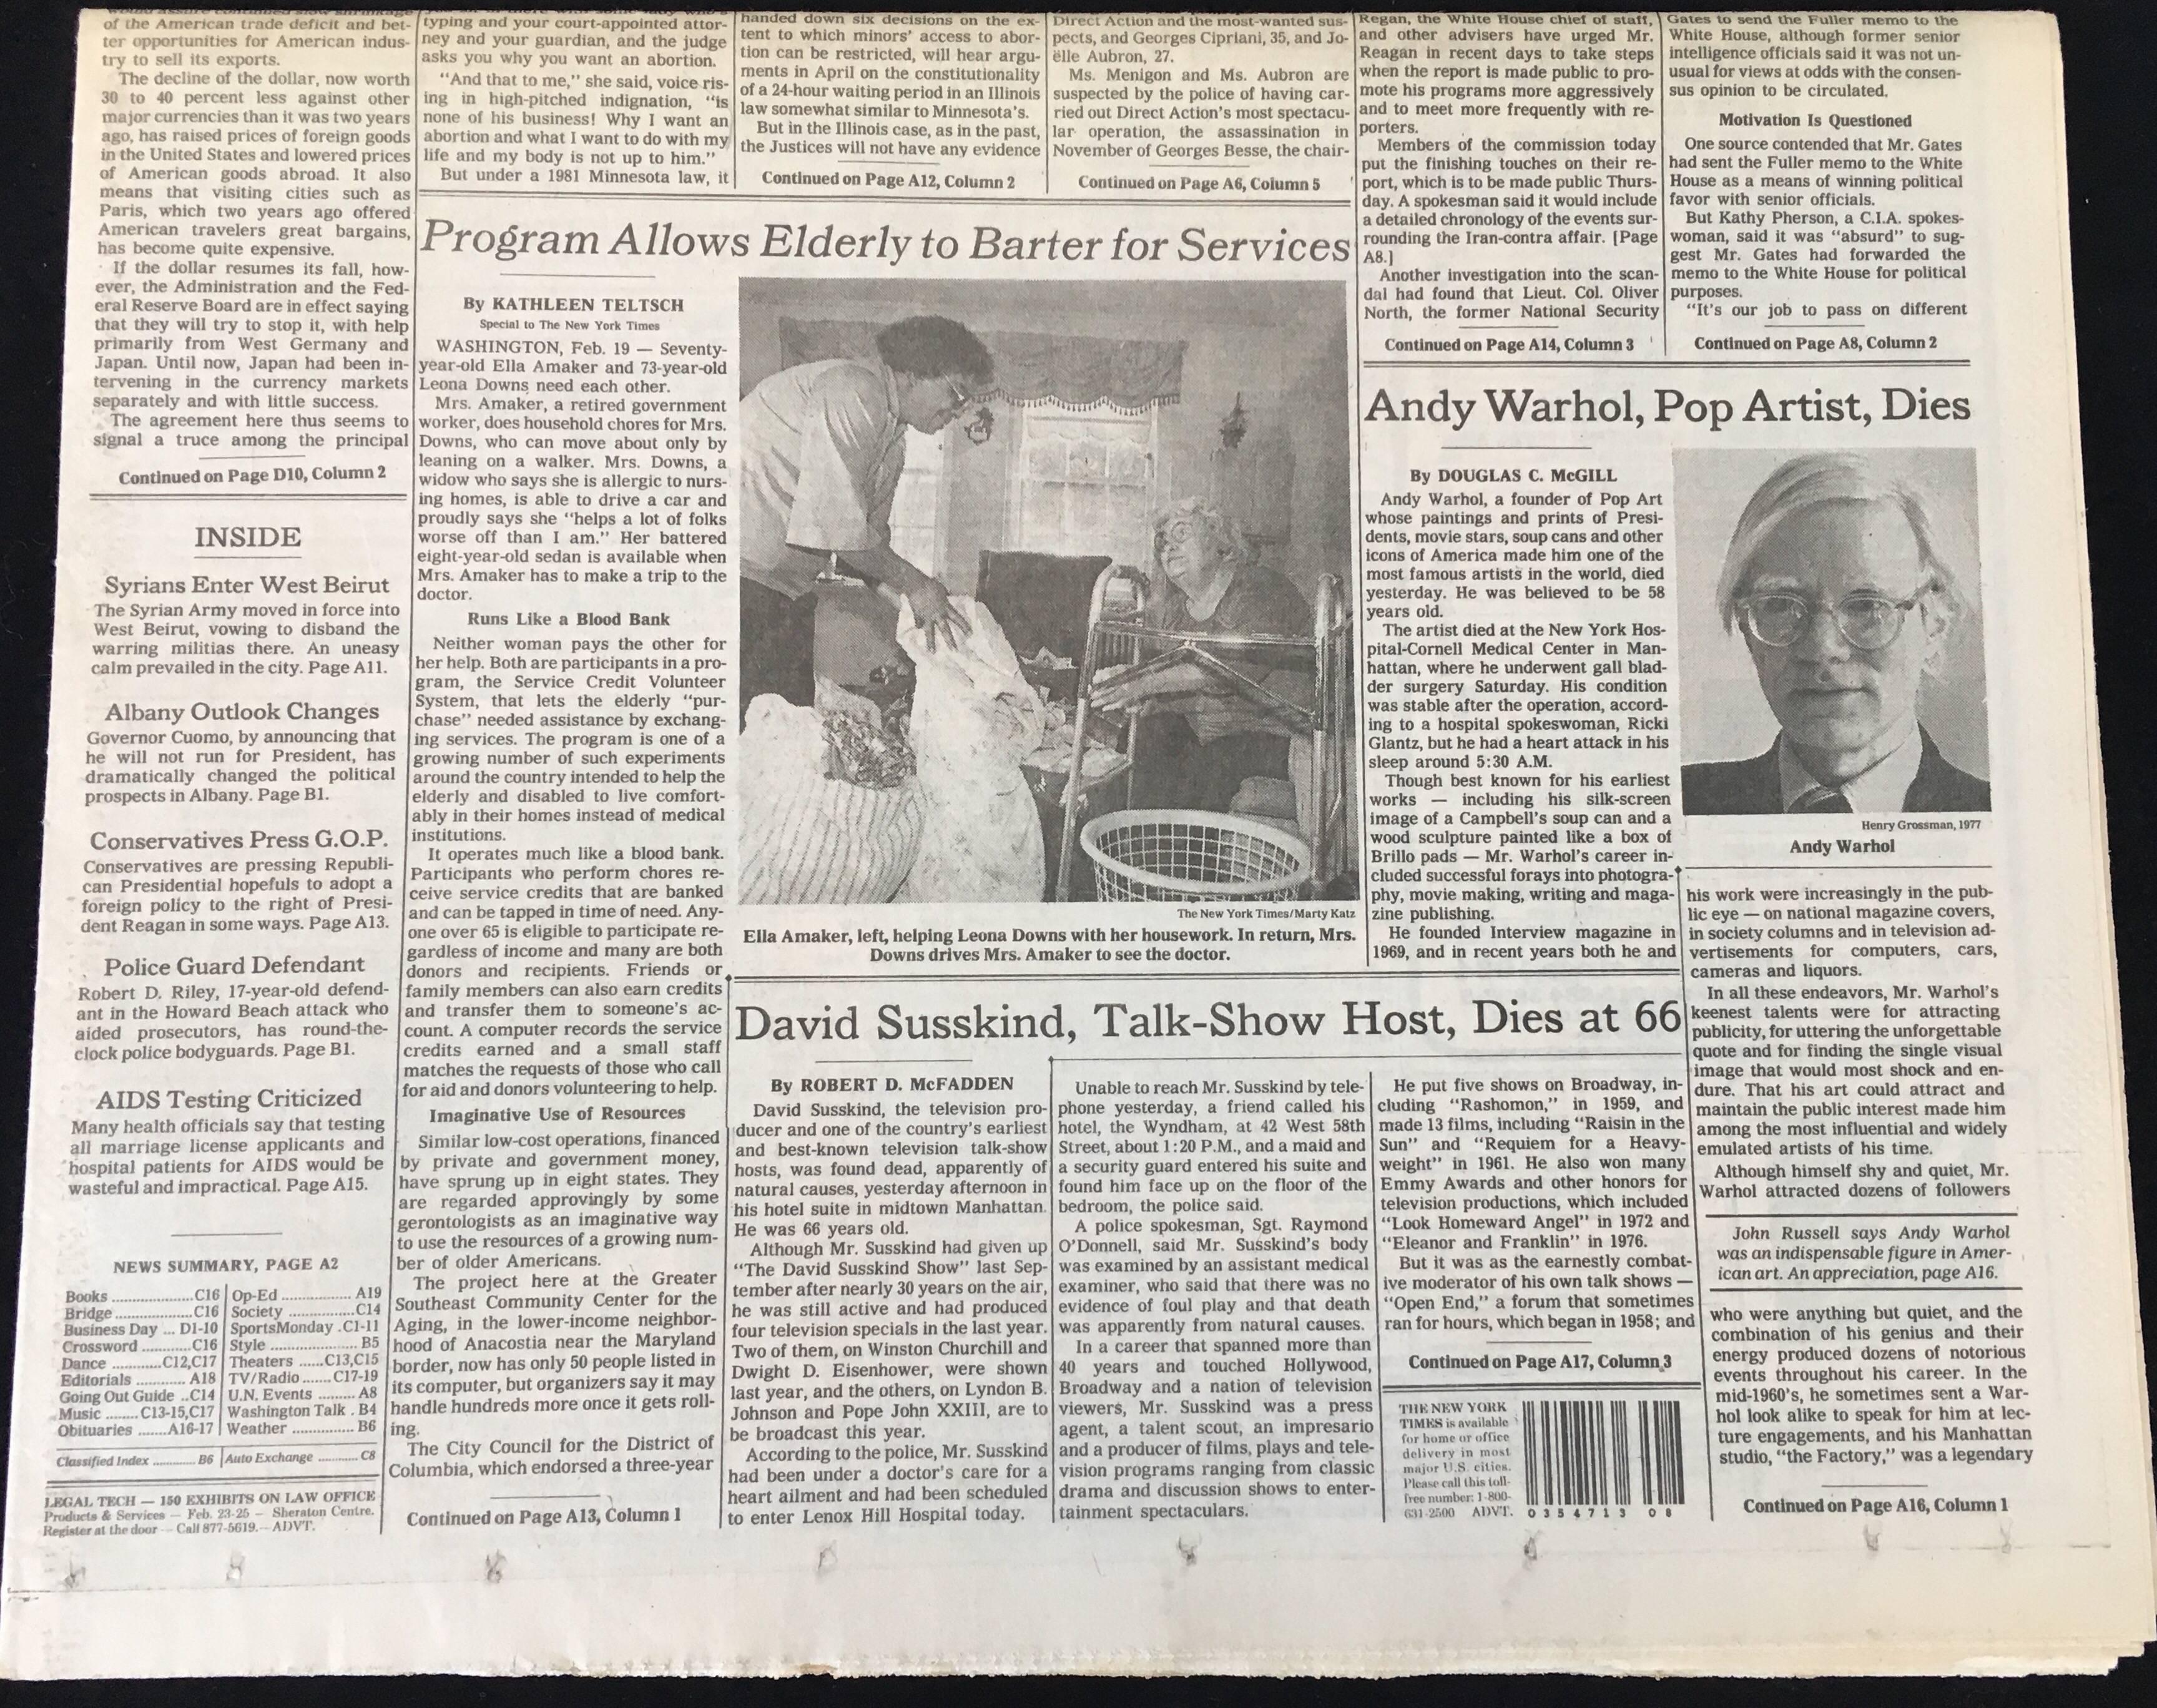 Andy Warhol Dies! Set of five 1987 NY Newspapers announcing Warhol's death 1